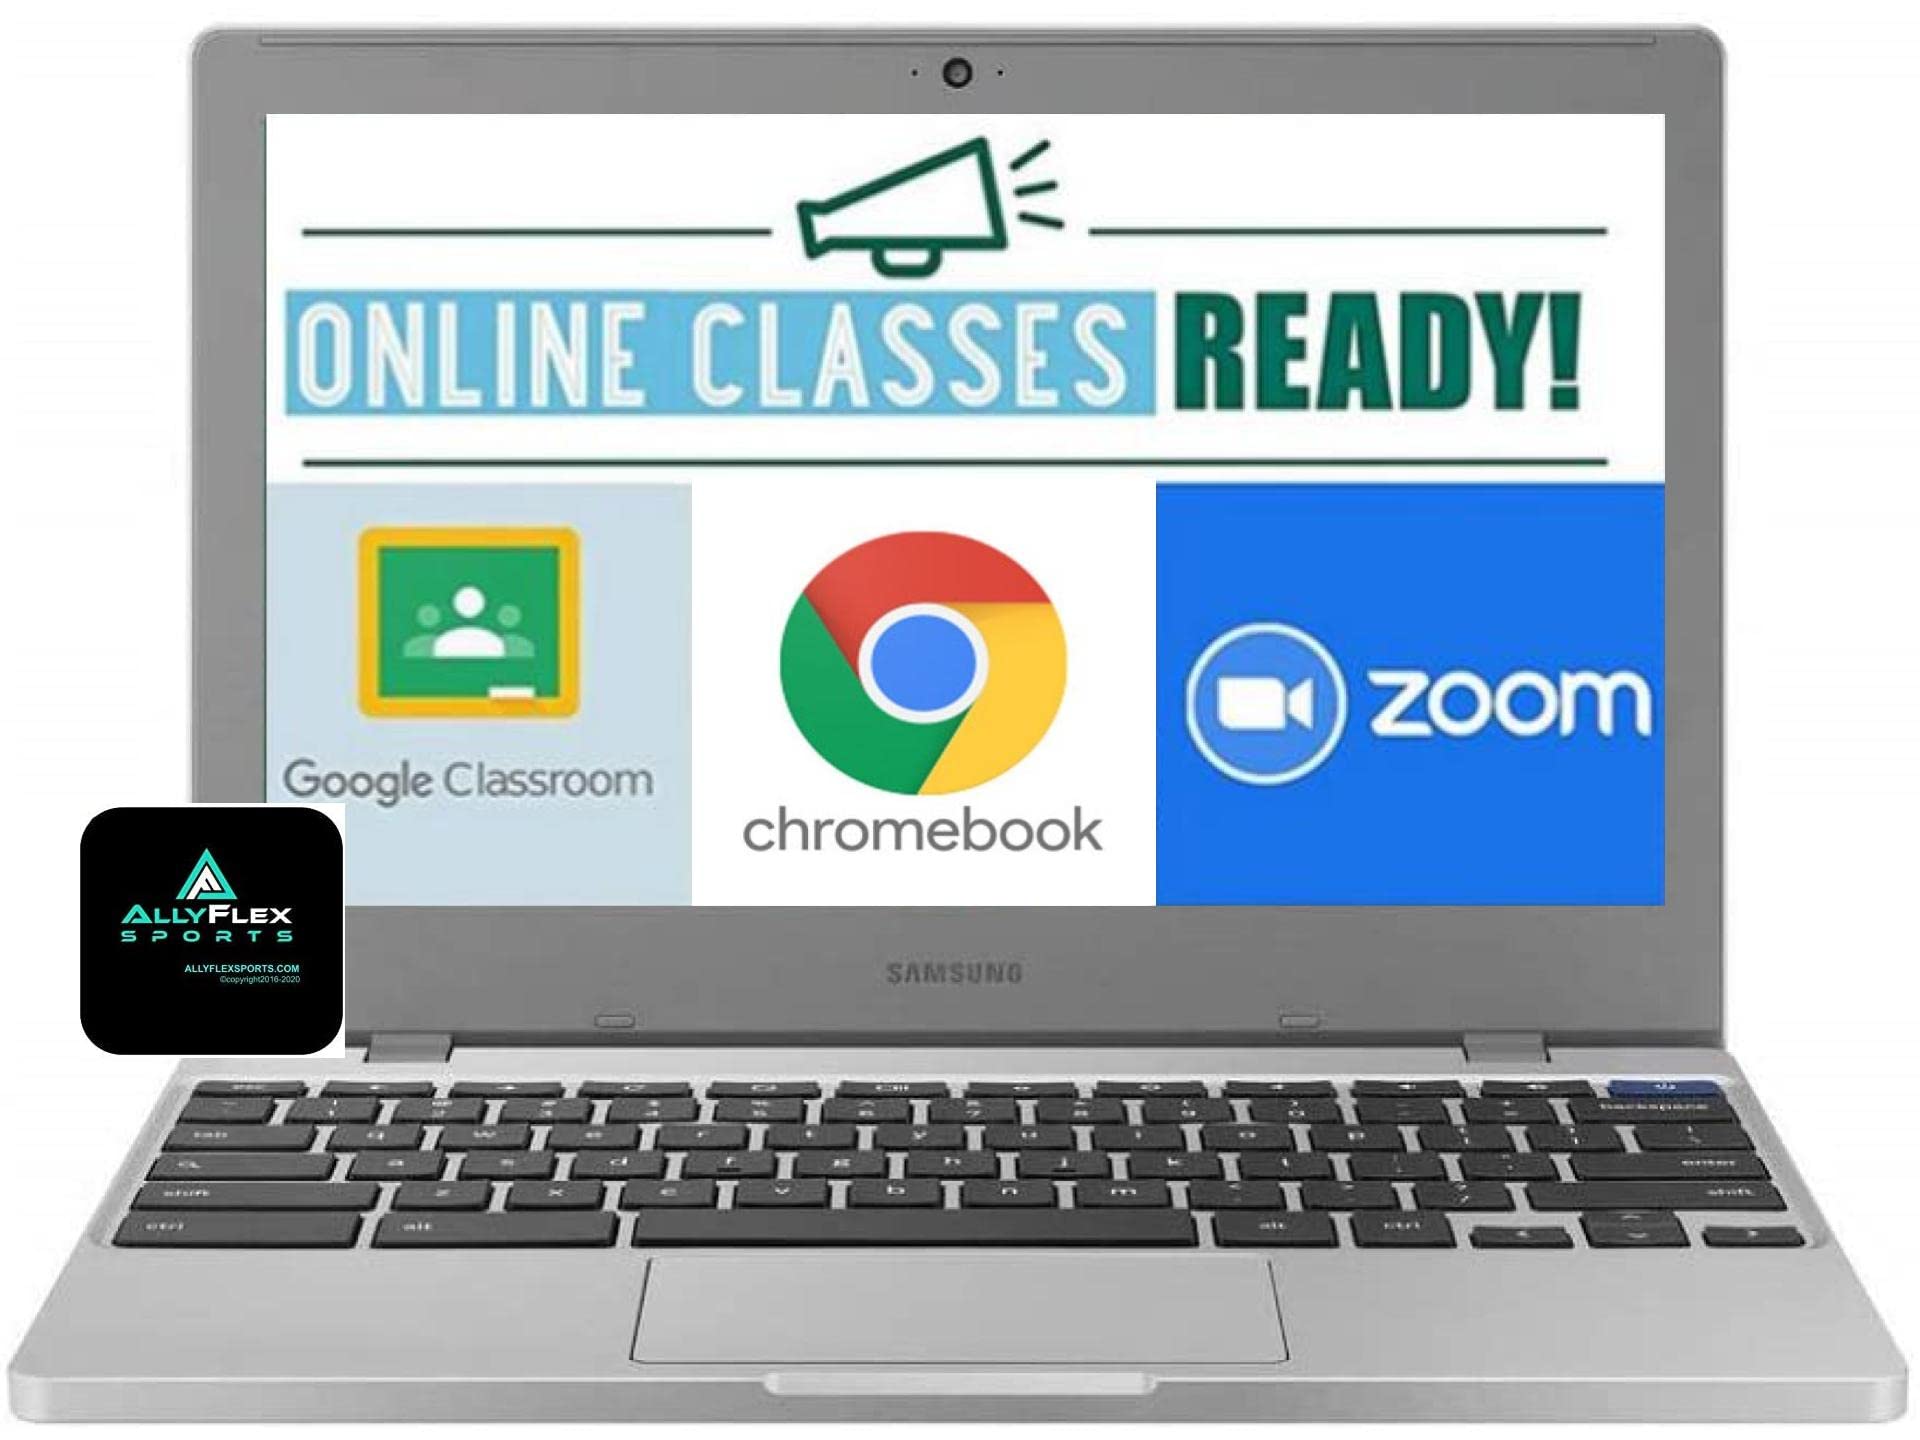 Newest Samsung Chromebook 4 11.6” Laptop Computer for Business Student, Intel Celeron N4020, 4GB RAM, 80GB Space(16GB eMMC+64GB USB), up to 12.5 Hrs Battery Life, USB Type-C, WiFi, Chrome OS, JVQ MP